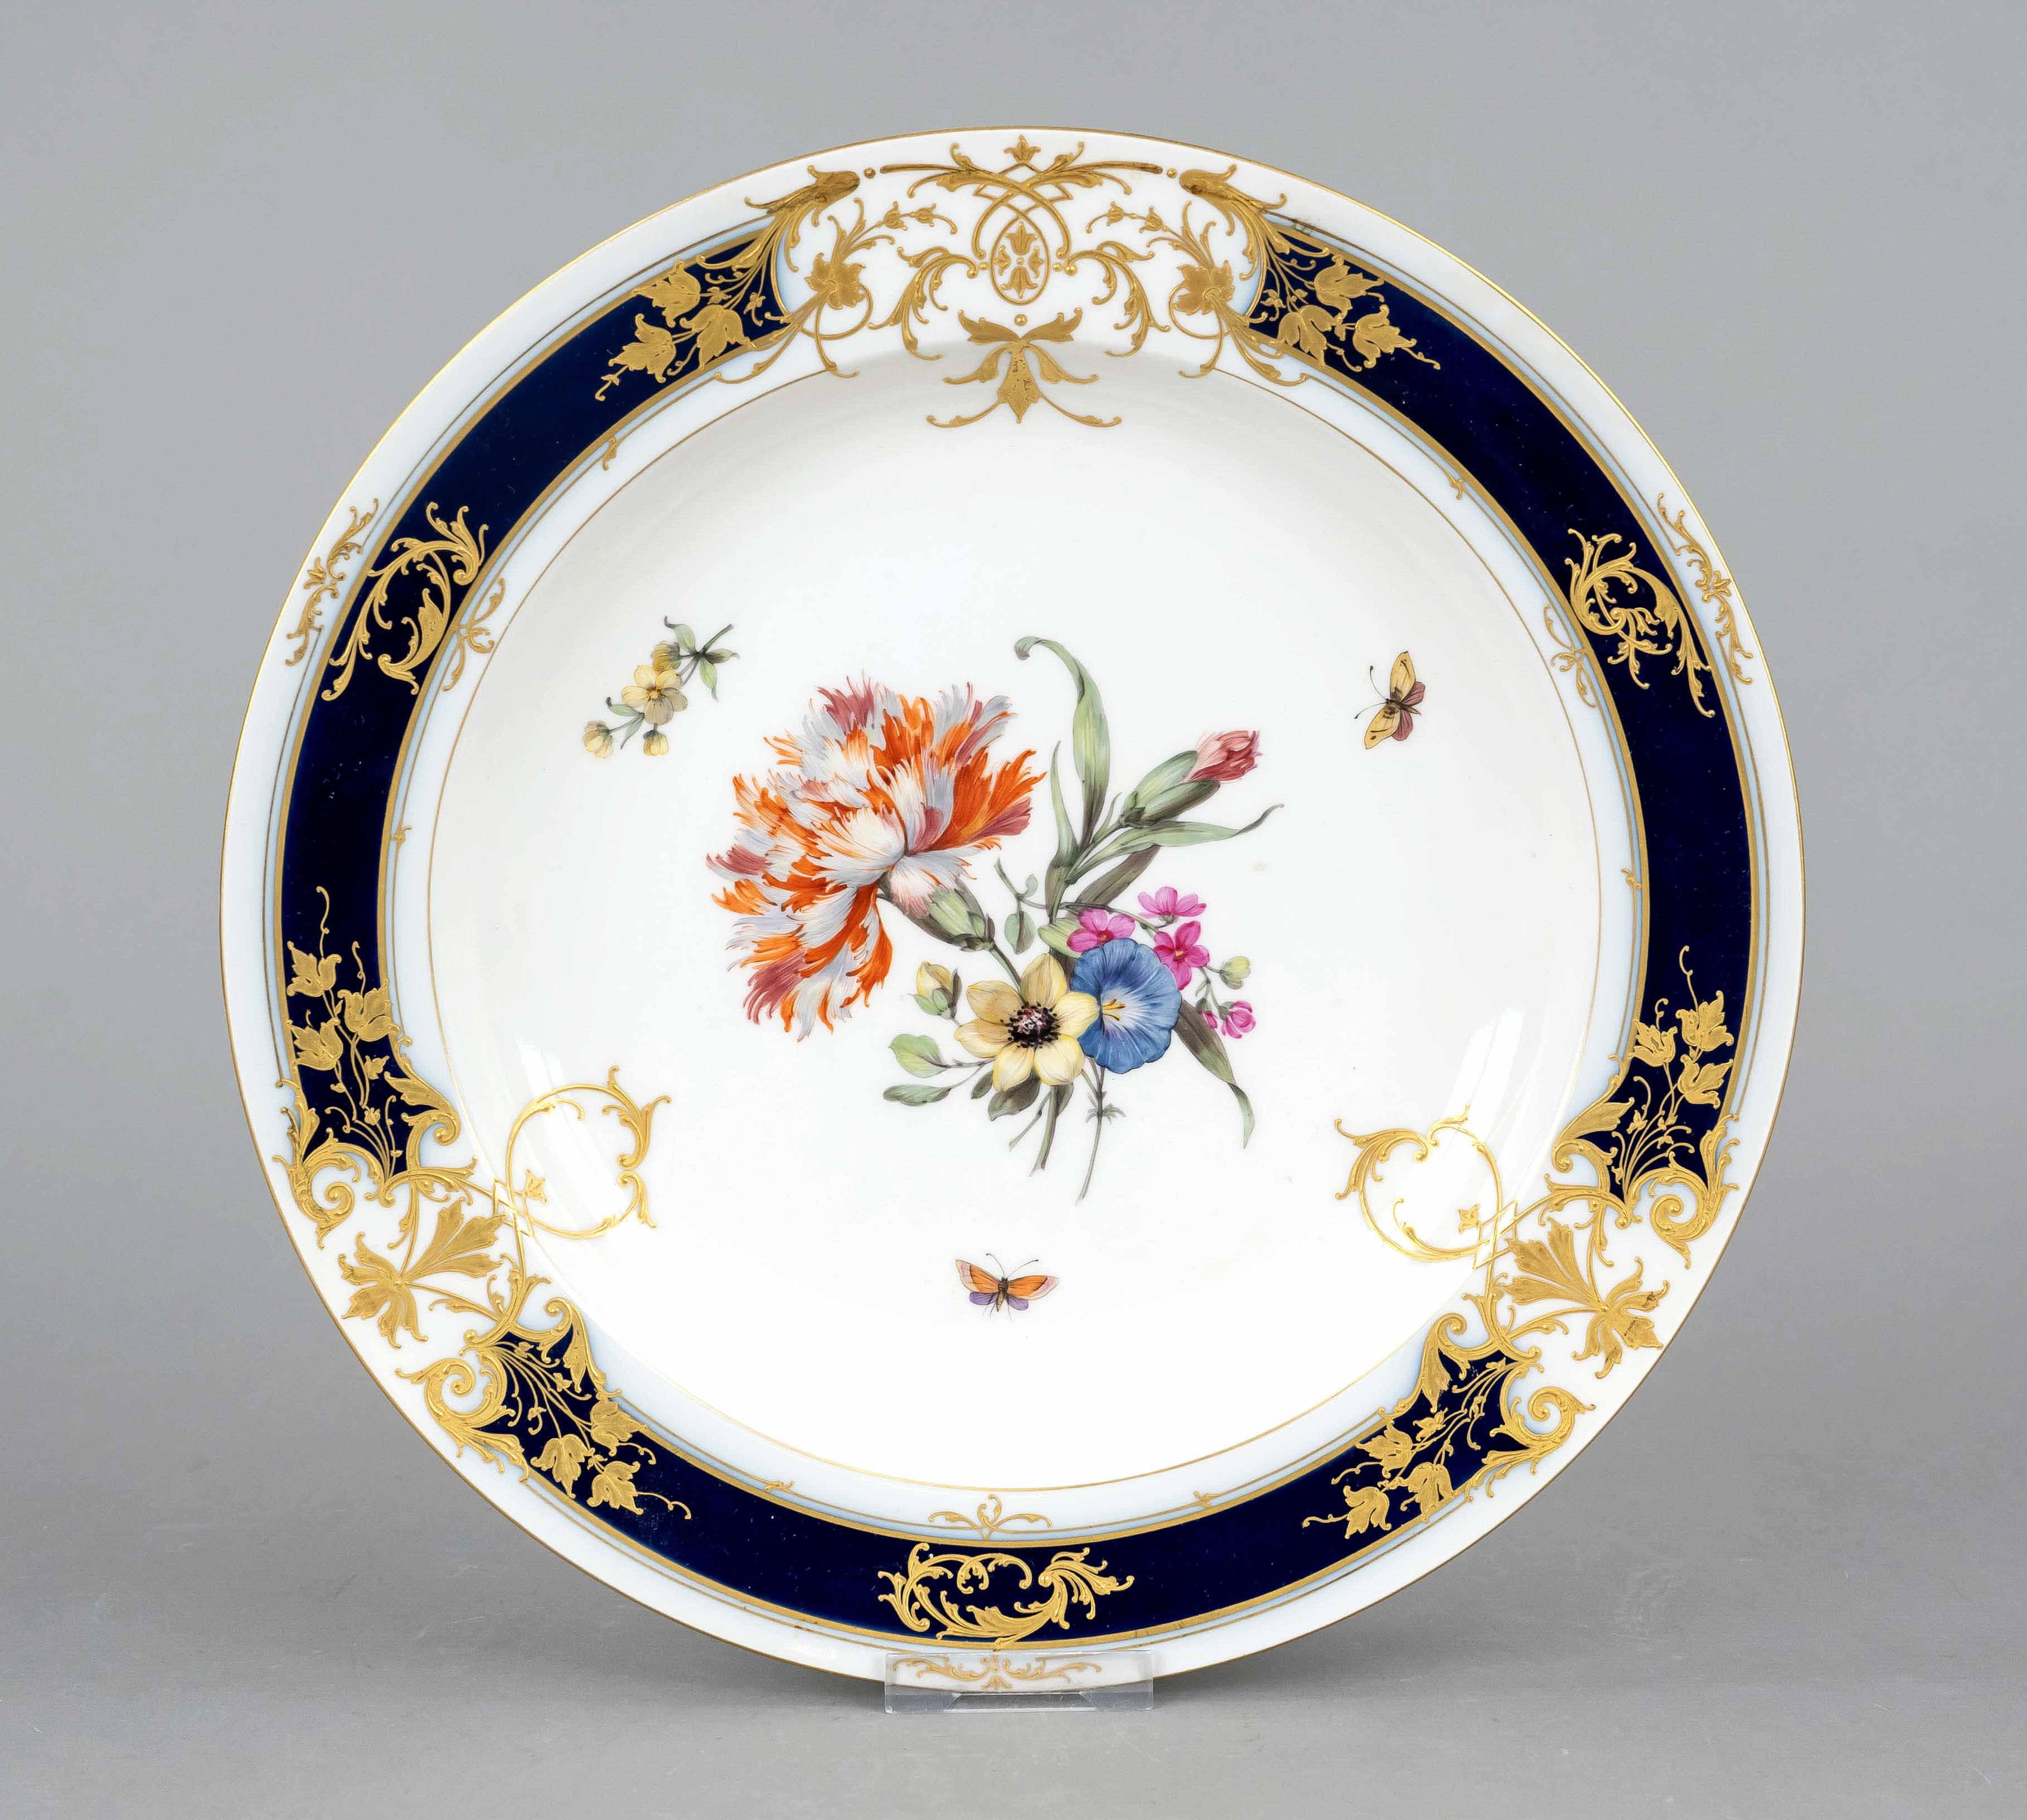 Large plate, KPM Berlin, mark before 1945, 1st choice, in the mirror polychrome painting with